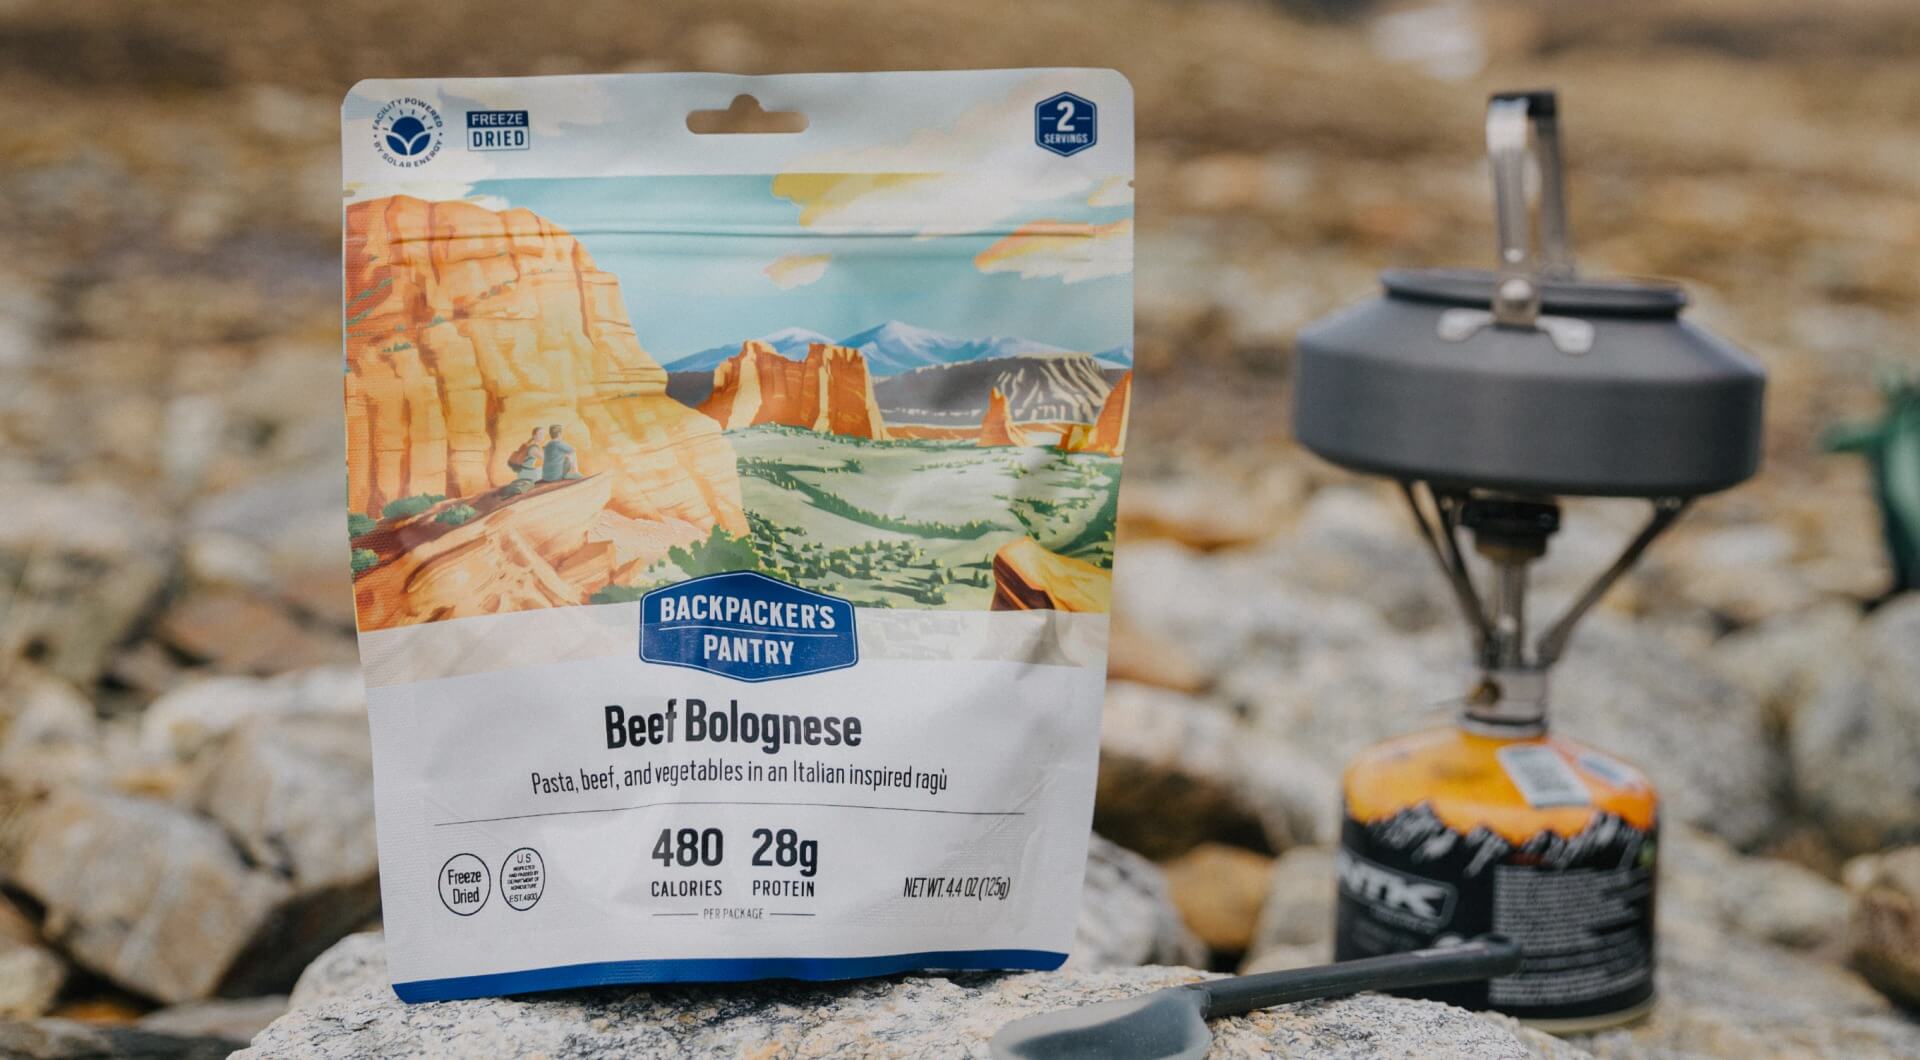 Beef Bolognese Camping meal